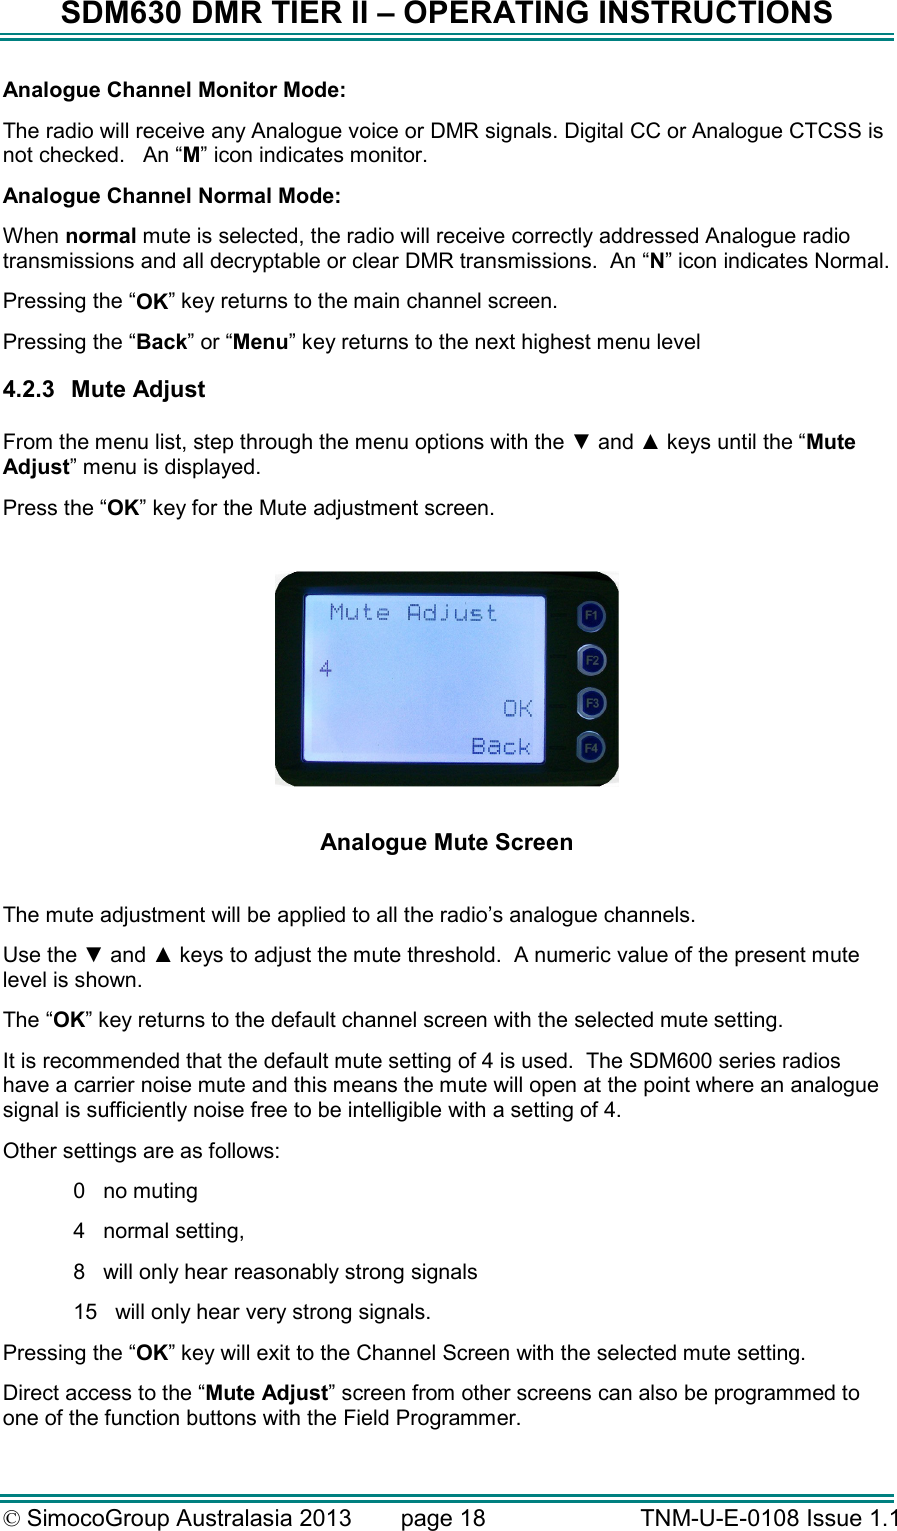 SDM630 DMR TIER II – OPERATING INSTRUCTIONS © SimocoGroup Australasia 2013   page 18   TNM-U-E-0108 Issue 1.1 Analogue Channel Monitor Mode:   The radio will receive any Analogue voice or DMR signals. Digital CC or Analogue CTCSS is not checked.   An “M” icon indicates monitor. Analogue Channel Normal Mode: When normal mute is selected, the radio will receive correctly addressed Analogue radio transmissions and all decryptable or clear DMR transmissions.  An “N” icon indicates Normal. Pressing the “OK” key returns to the main channel screen.   Pressing the “Back” or “Menu” key returns to the next highest menu level 4.2.3  Mute Adjust  From the menu list, step through the menu options with the ▼ and ▲ keys until the “Mute Adjust” menu is displayed. Press the “OK” key for the Mute adjustment screen.    Analogue Mute Screen  The mute adjustment will be applied to all the radio’s analogue channels. Use the ▼ and ▲ keys to adjust the mute threshold.  A numeric value of the present mute level is shown. The “OK” key returns to the default channel screen with the selected mute setting. It is recommended that the default mute setting of 4 is used.  The SDM600 series radios have a carrier noise mute and this means the mute will open at the point where an analogue signal is sufficiently noise free to be intelligible with a setting of 4. Other settings are as follows: 0   no muting 4   normal setting, 8   will only hear reasonably strong signals  15   will only hear very strong signals. Pressing the “OK” key will exit to the Channel Screen with the selected mute setting. Direct access to the “Mute Adjust” screen from other screens can also be programmed to one of the function buttons with the Field Programmer. 